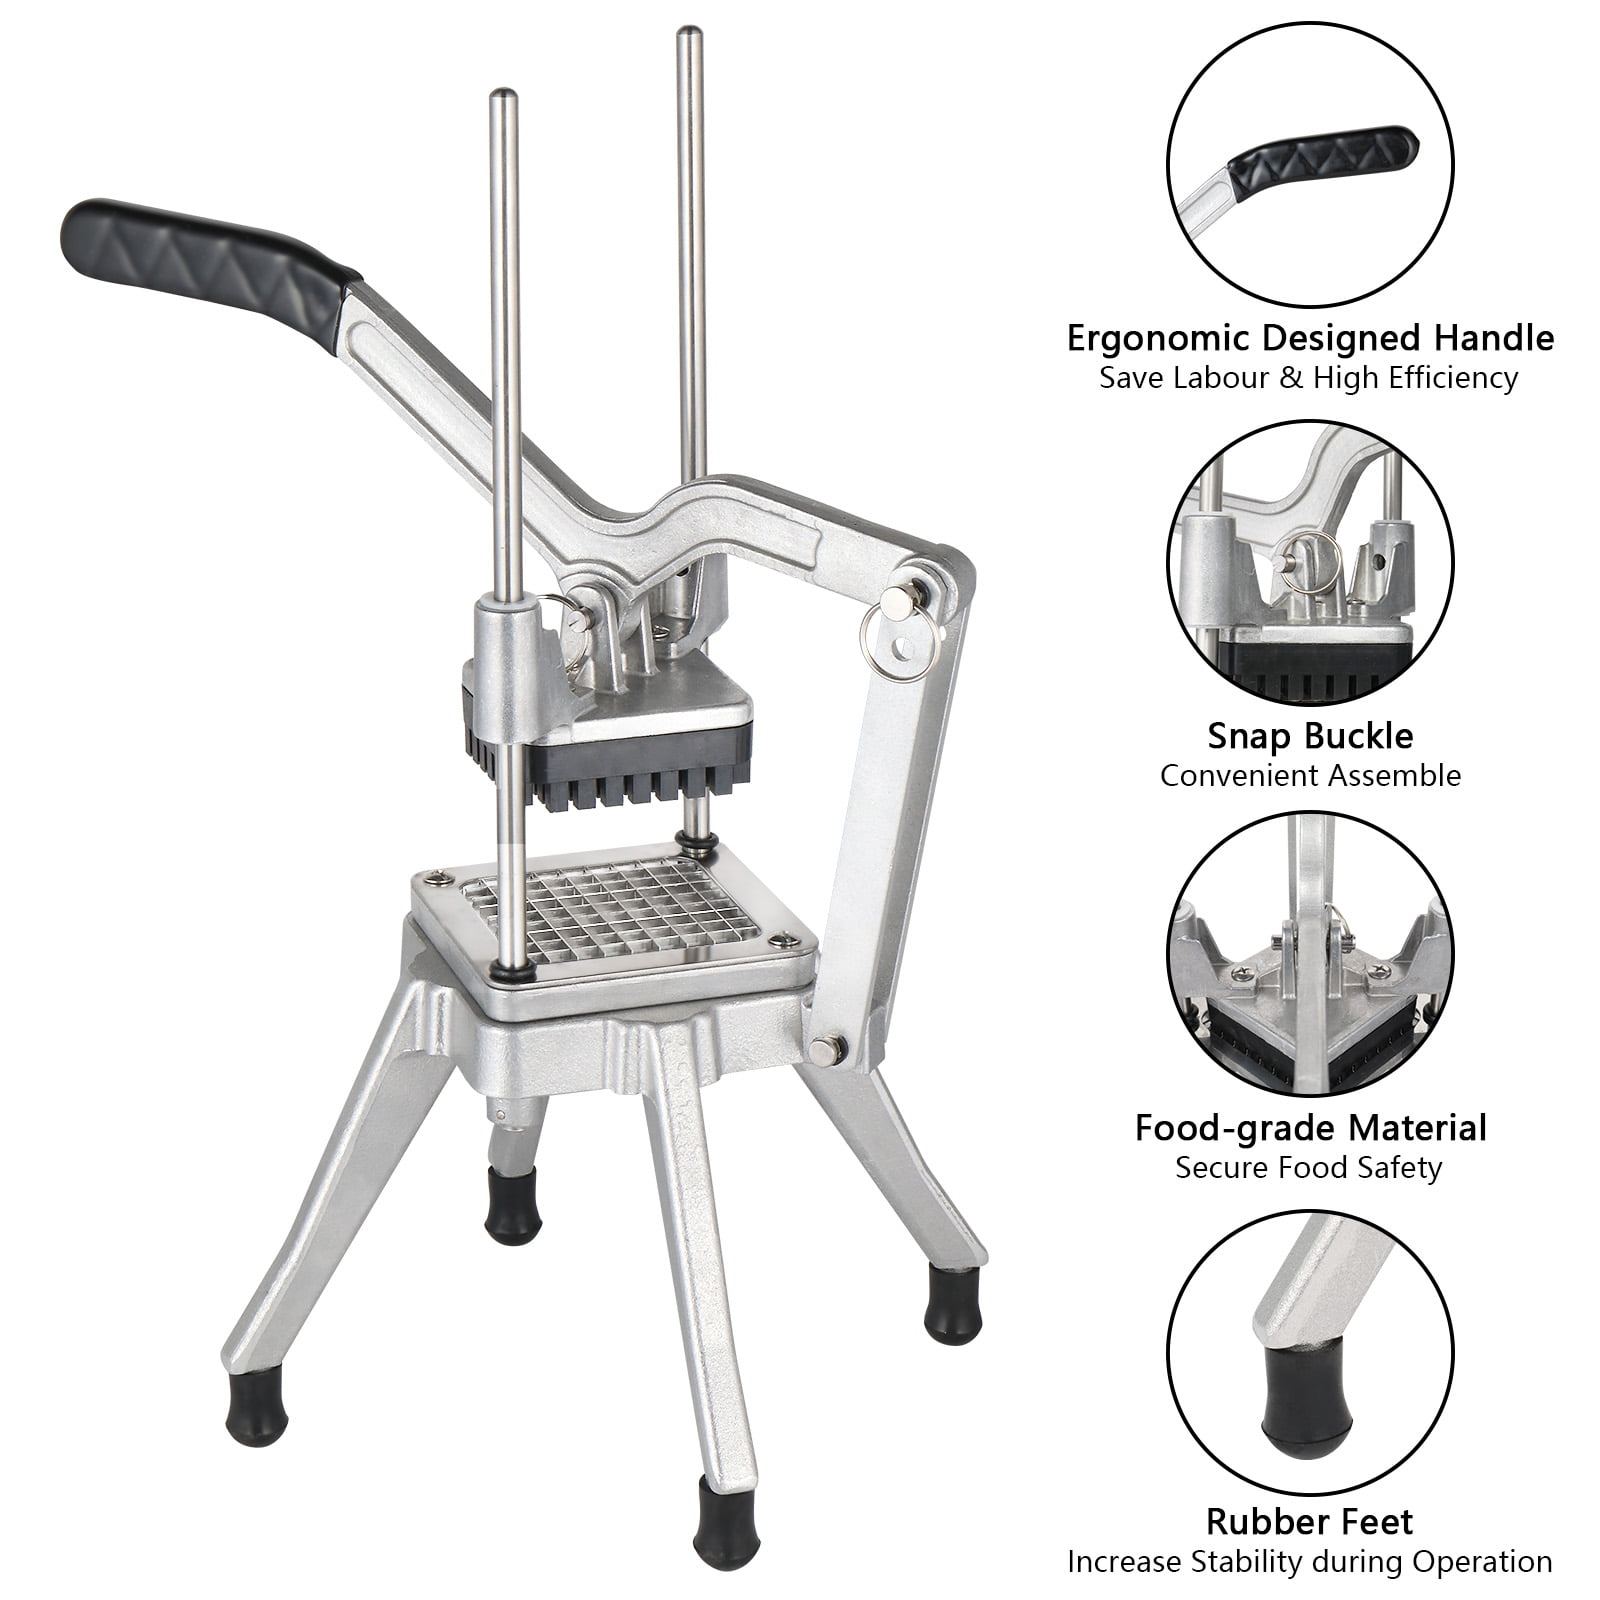 TUNTROL 1/2 Commercial Vegetable Dicer, French Fry Cutter with Lever, Aluminum Frame and S-Steel Blade